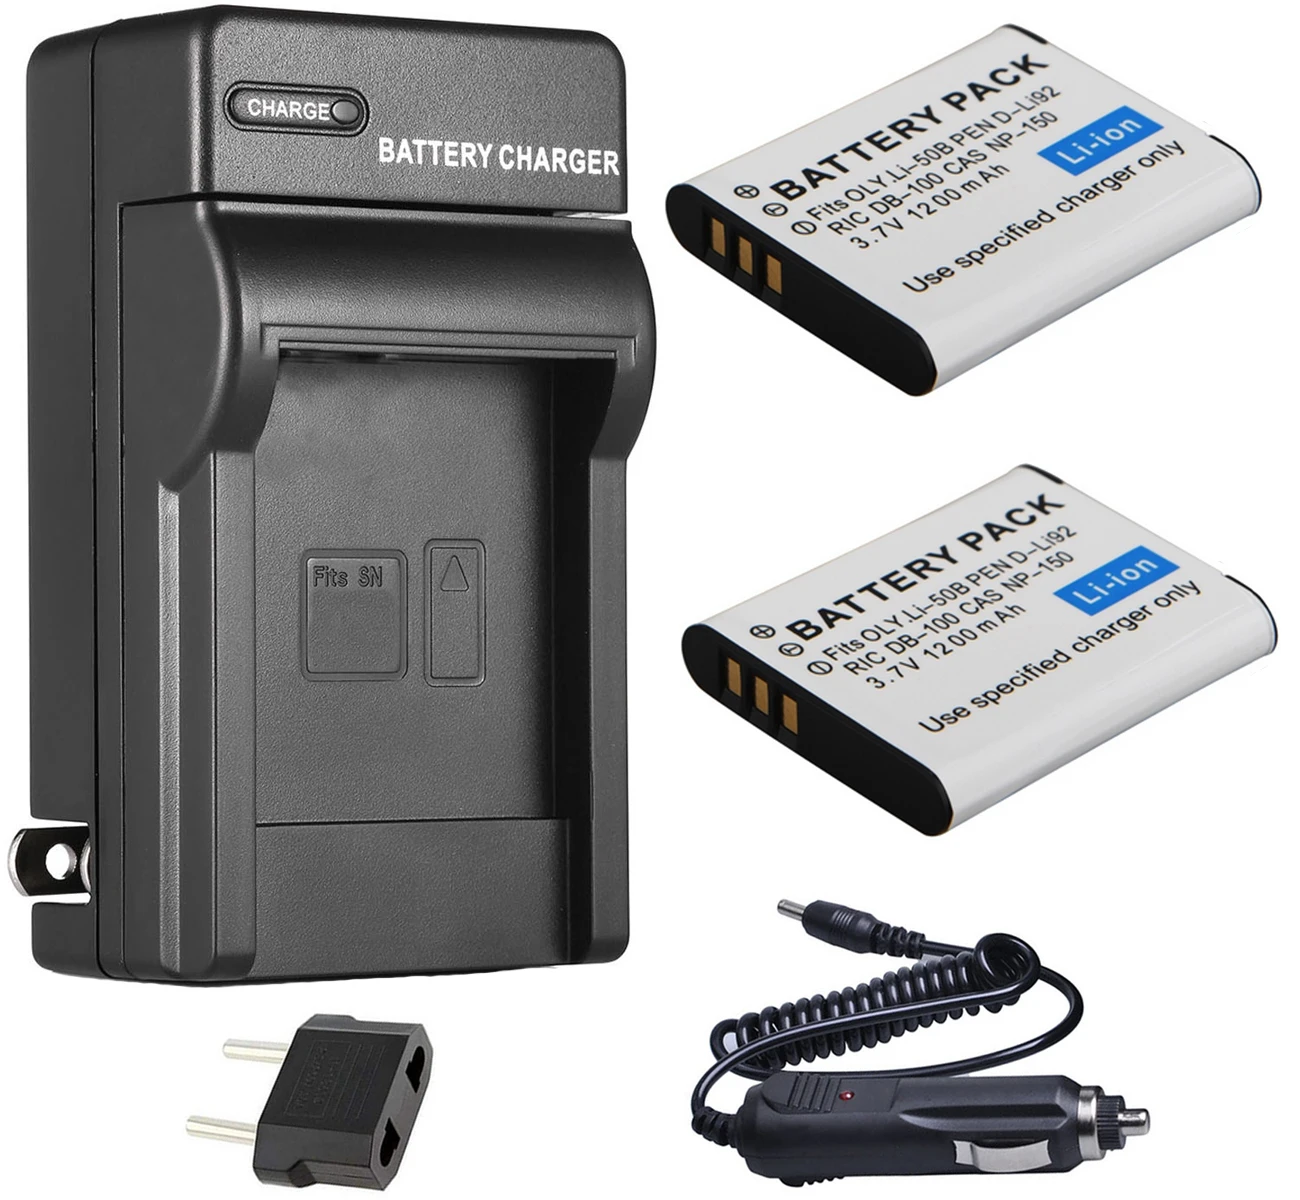 Battery Charger For CAS Casio CNP50 NP50 NP-50 C04 